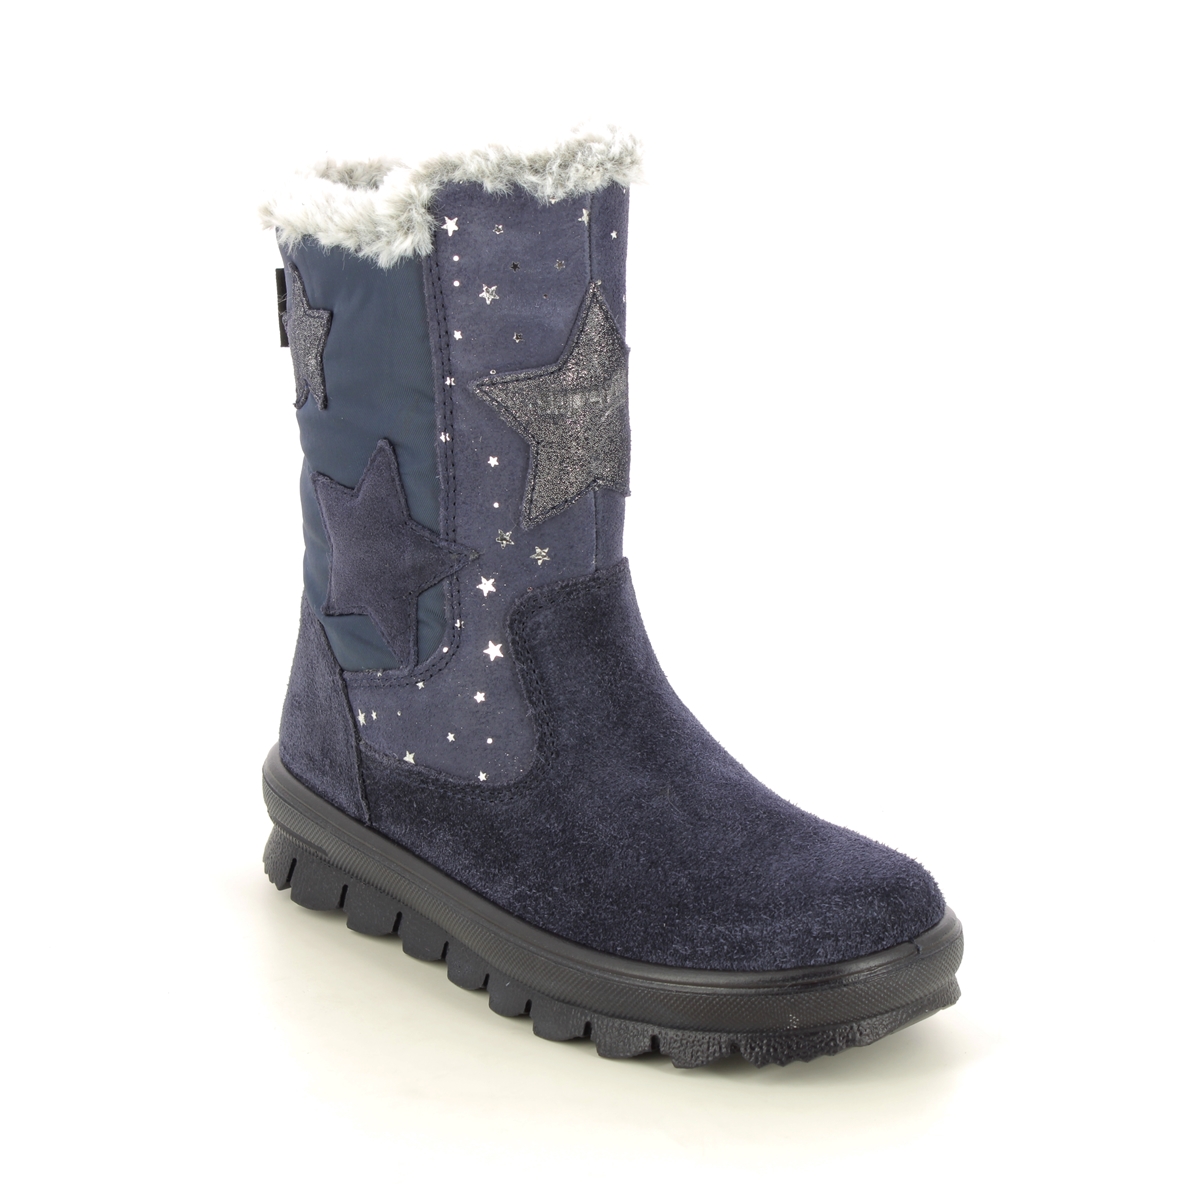 Superfit Flavia Star Gtx Navy Suede Kids Girls Boots 1000219-8000 In Size 35 In Plain Navy Suede For kids